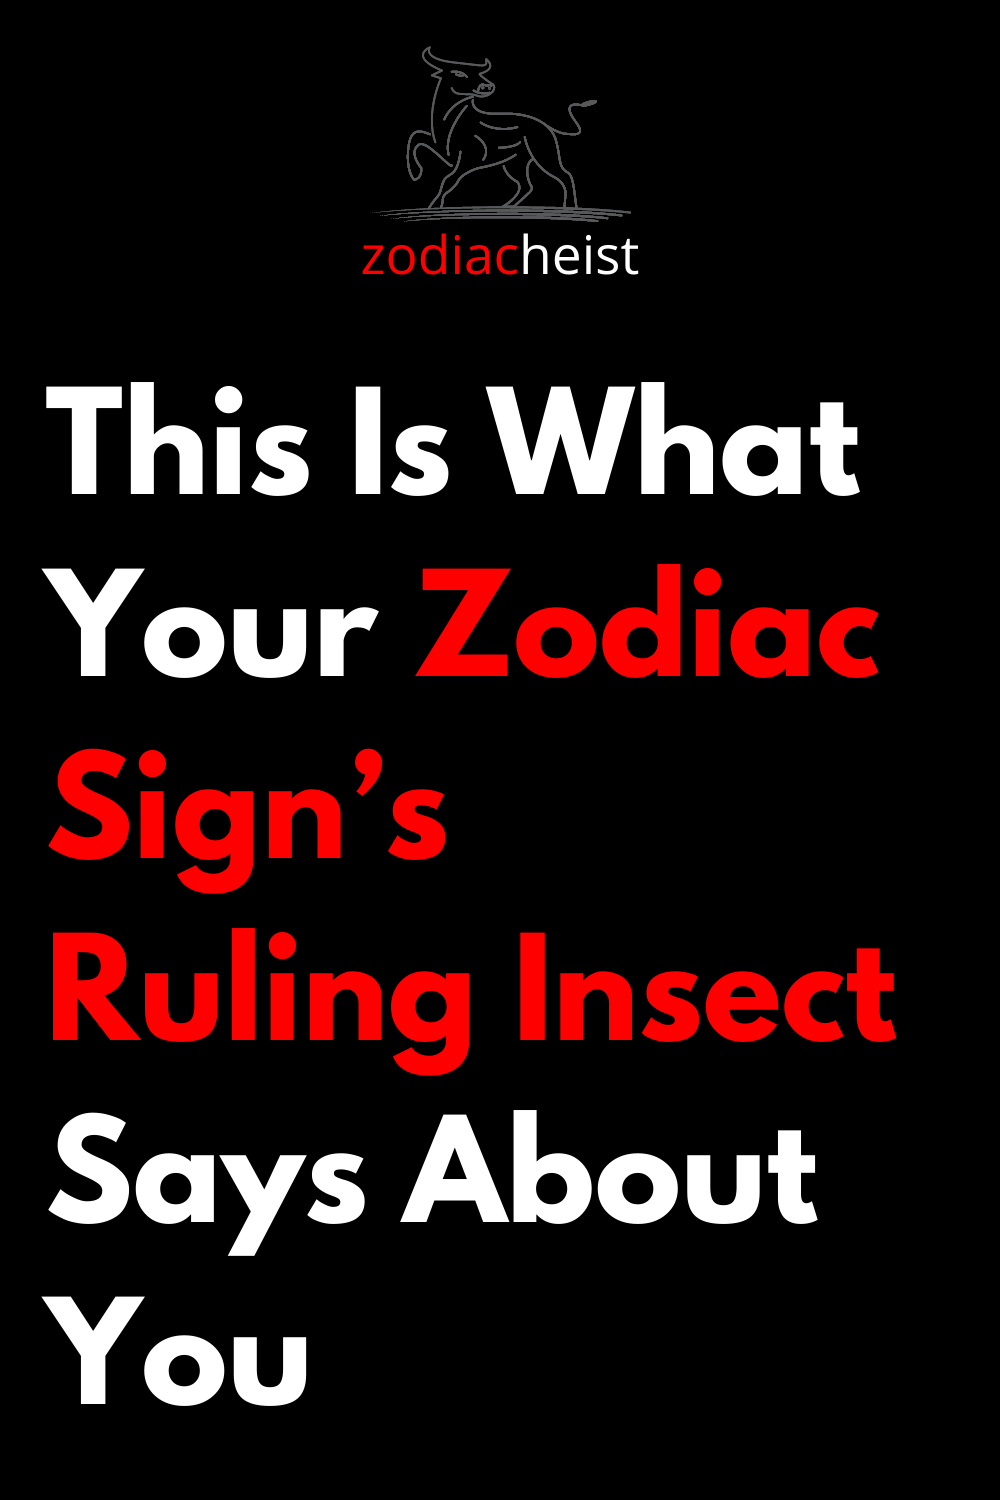 This Is What Your Zodiac Sign’s Ruling Insect Says About You